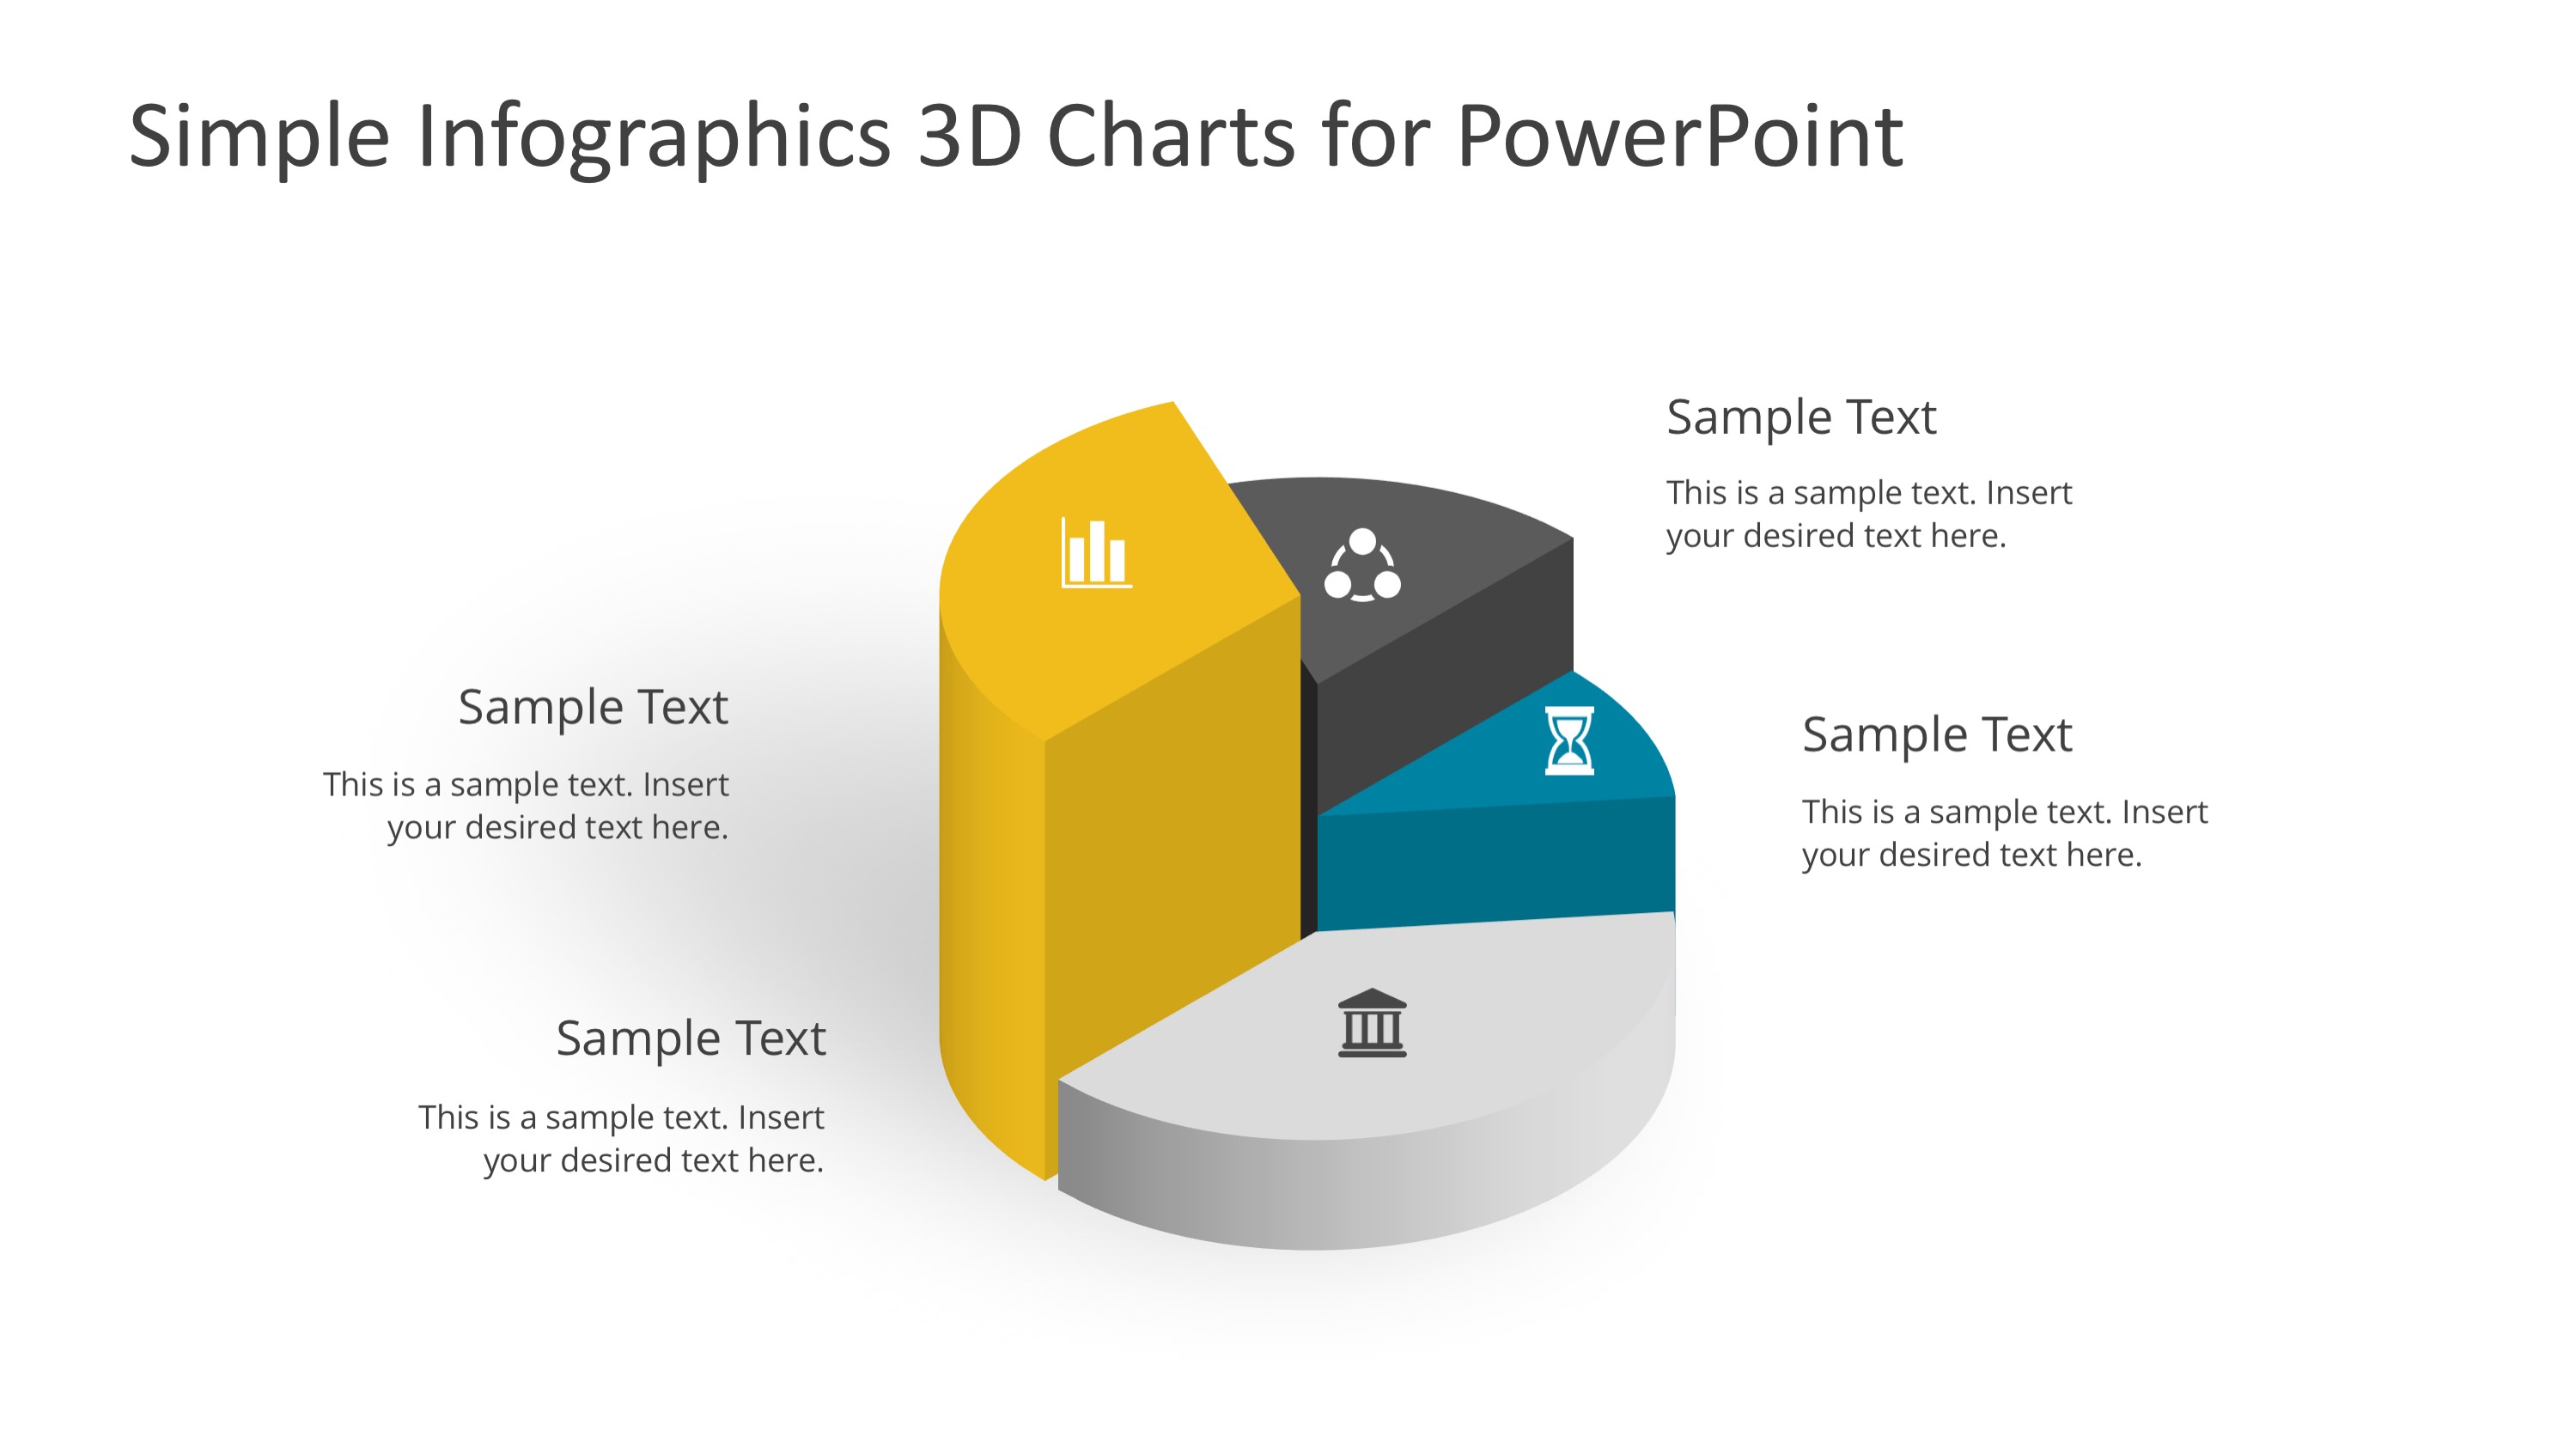 powerpoint infographic